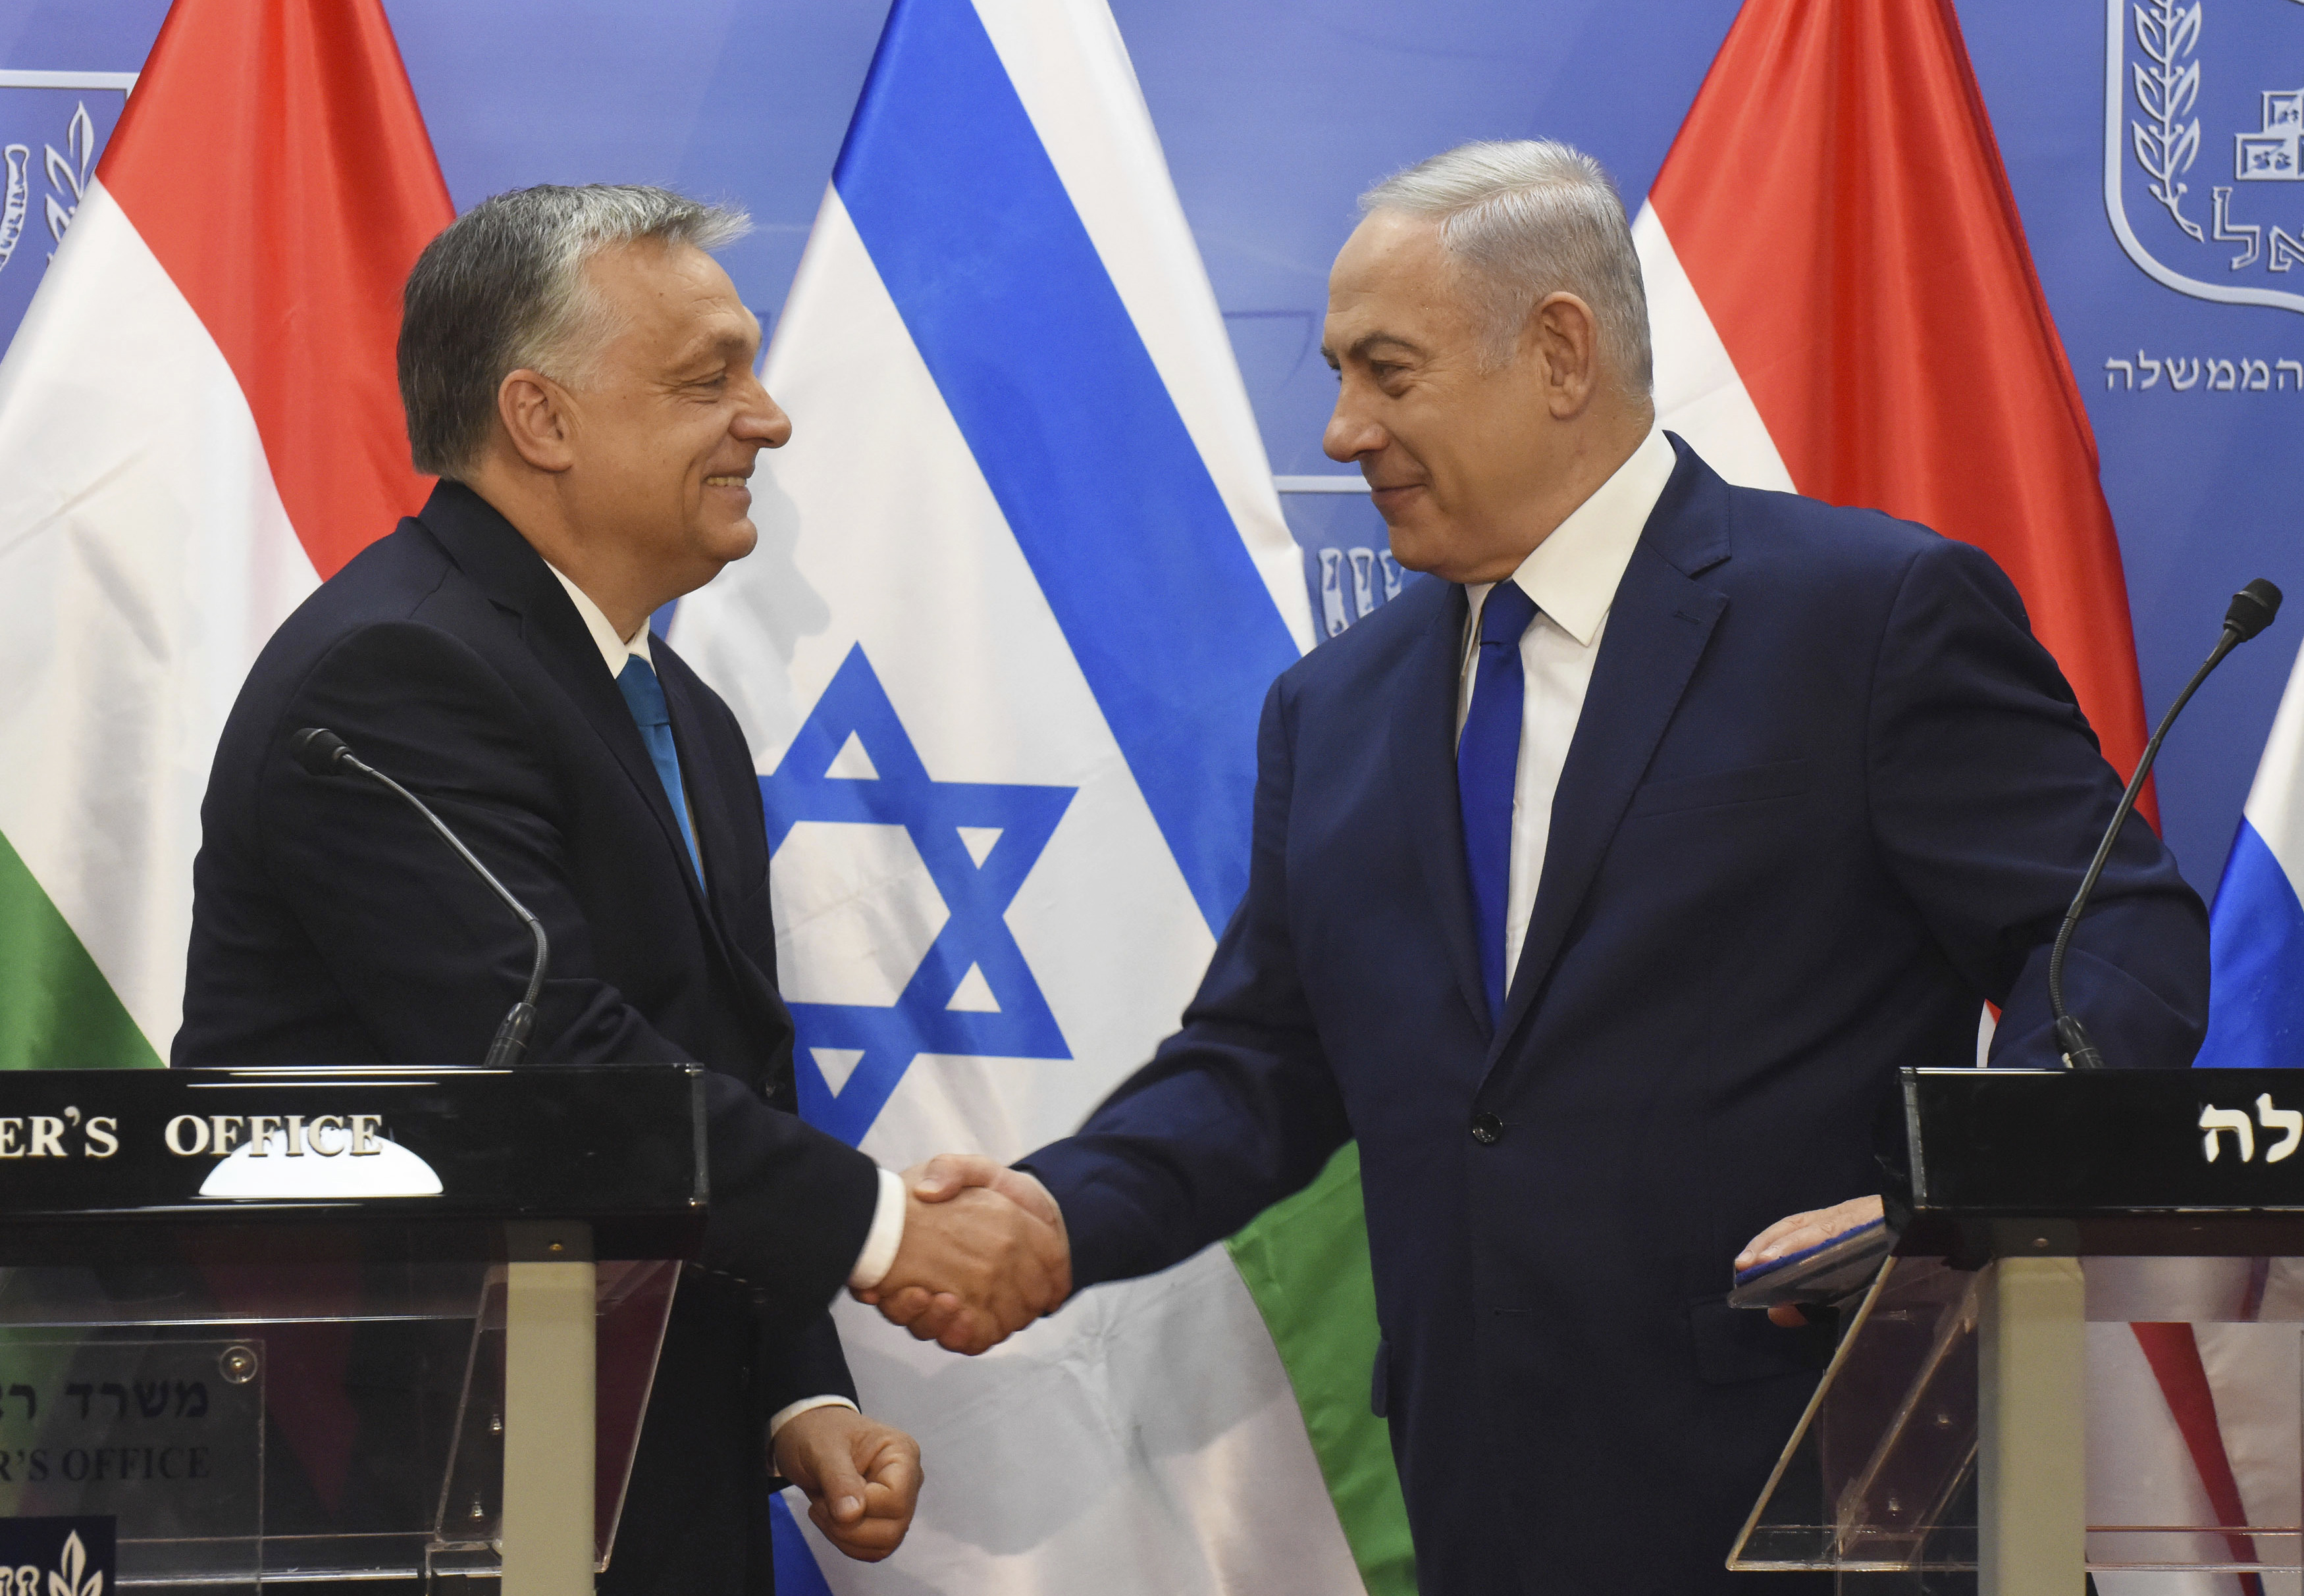 Hungarian Prime Minister Viktor Orban (L) shake hands with Israeli Prime Minister Benjamin Netanyahu ( R ) on during joint statements at the prime minister's office in Jerusalem, Israel, July 19, 2019.